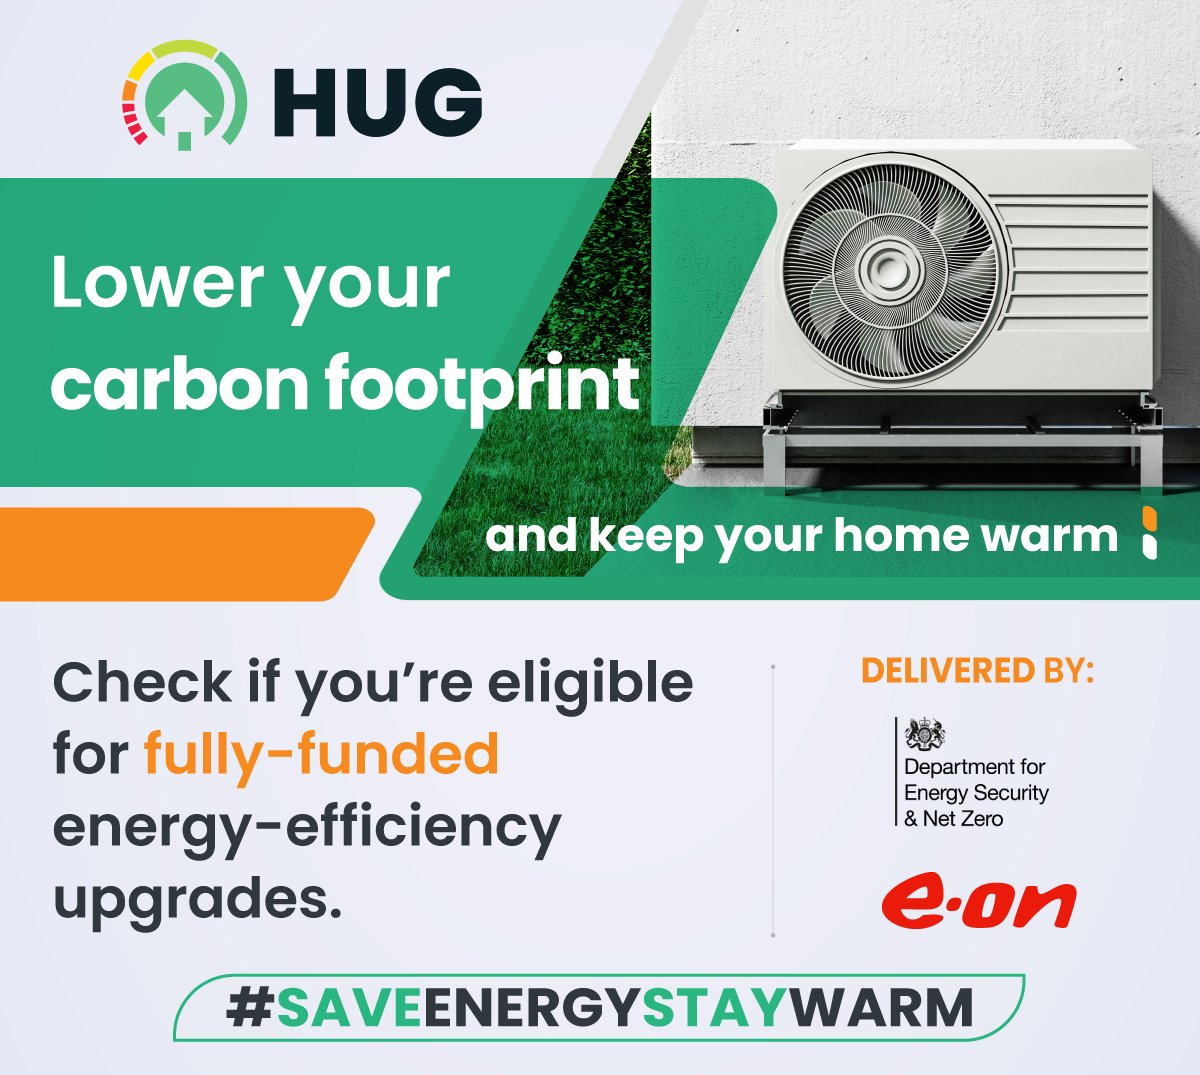 Would you like to save money on your bills? Then why not see if you're eligible for the new HUG 2 scheme, which is supporting low-income households to make their houses more energy efficient! To learn more, visit: orlo.uk/LDSoL #energyefficienthomes #governmentfunding